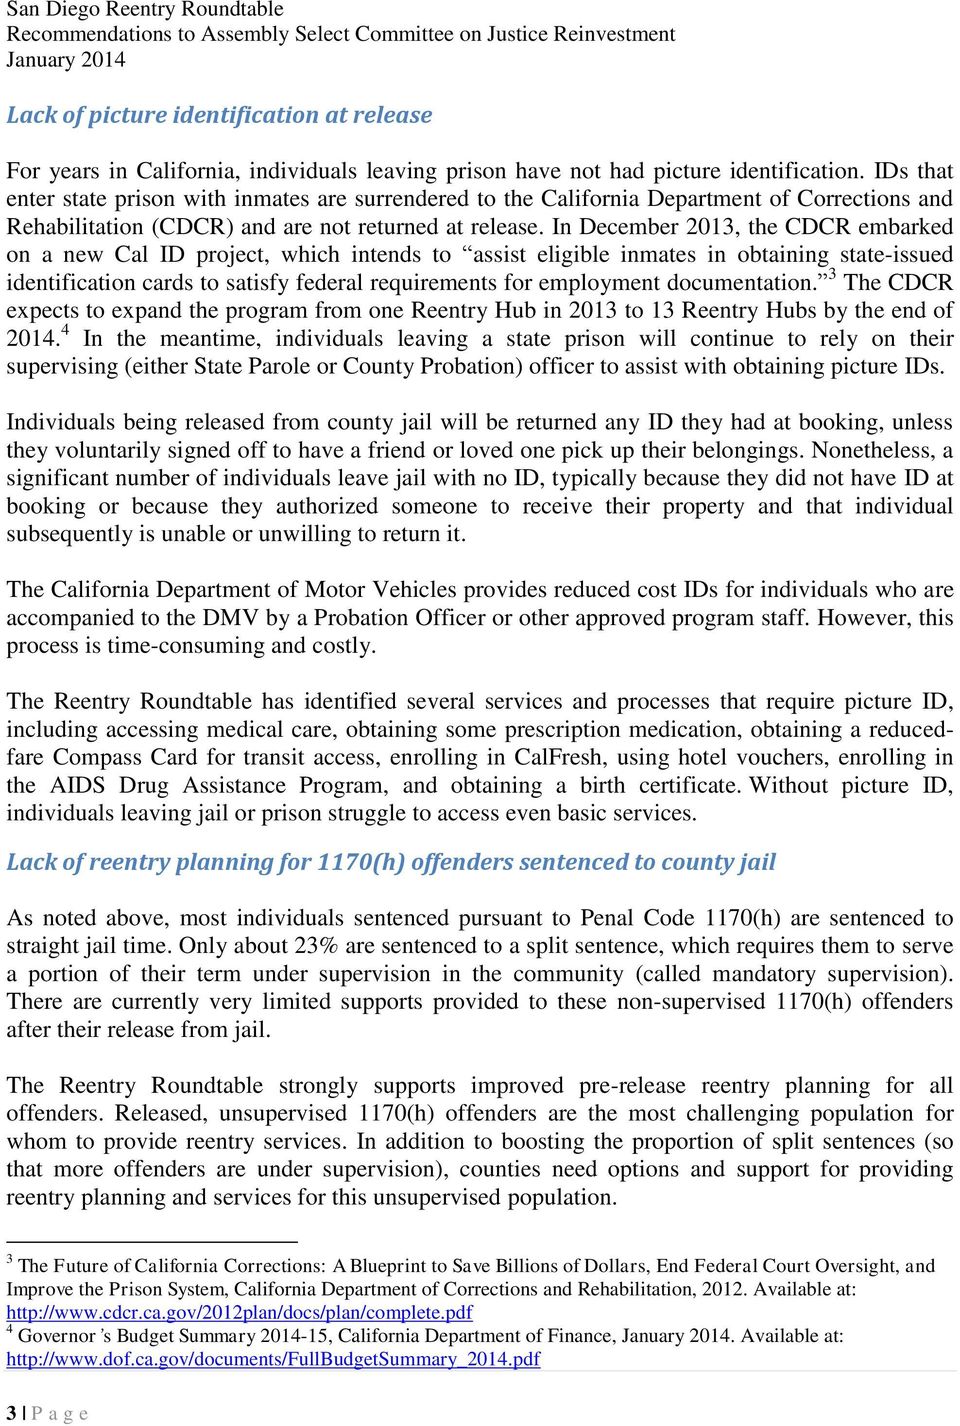 In December 2013, the CDCR embarked on a new Cal ID project, which intends to assist eligible inmates in obtaining state-issued identification cards to satisfy federal requirements for employment